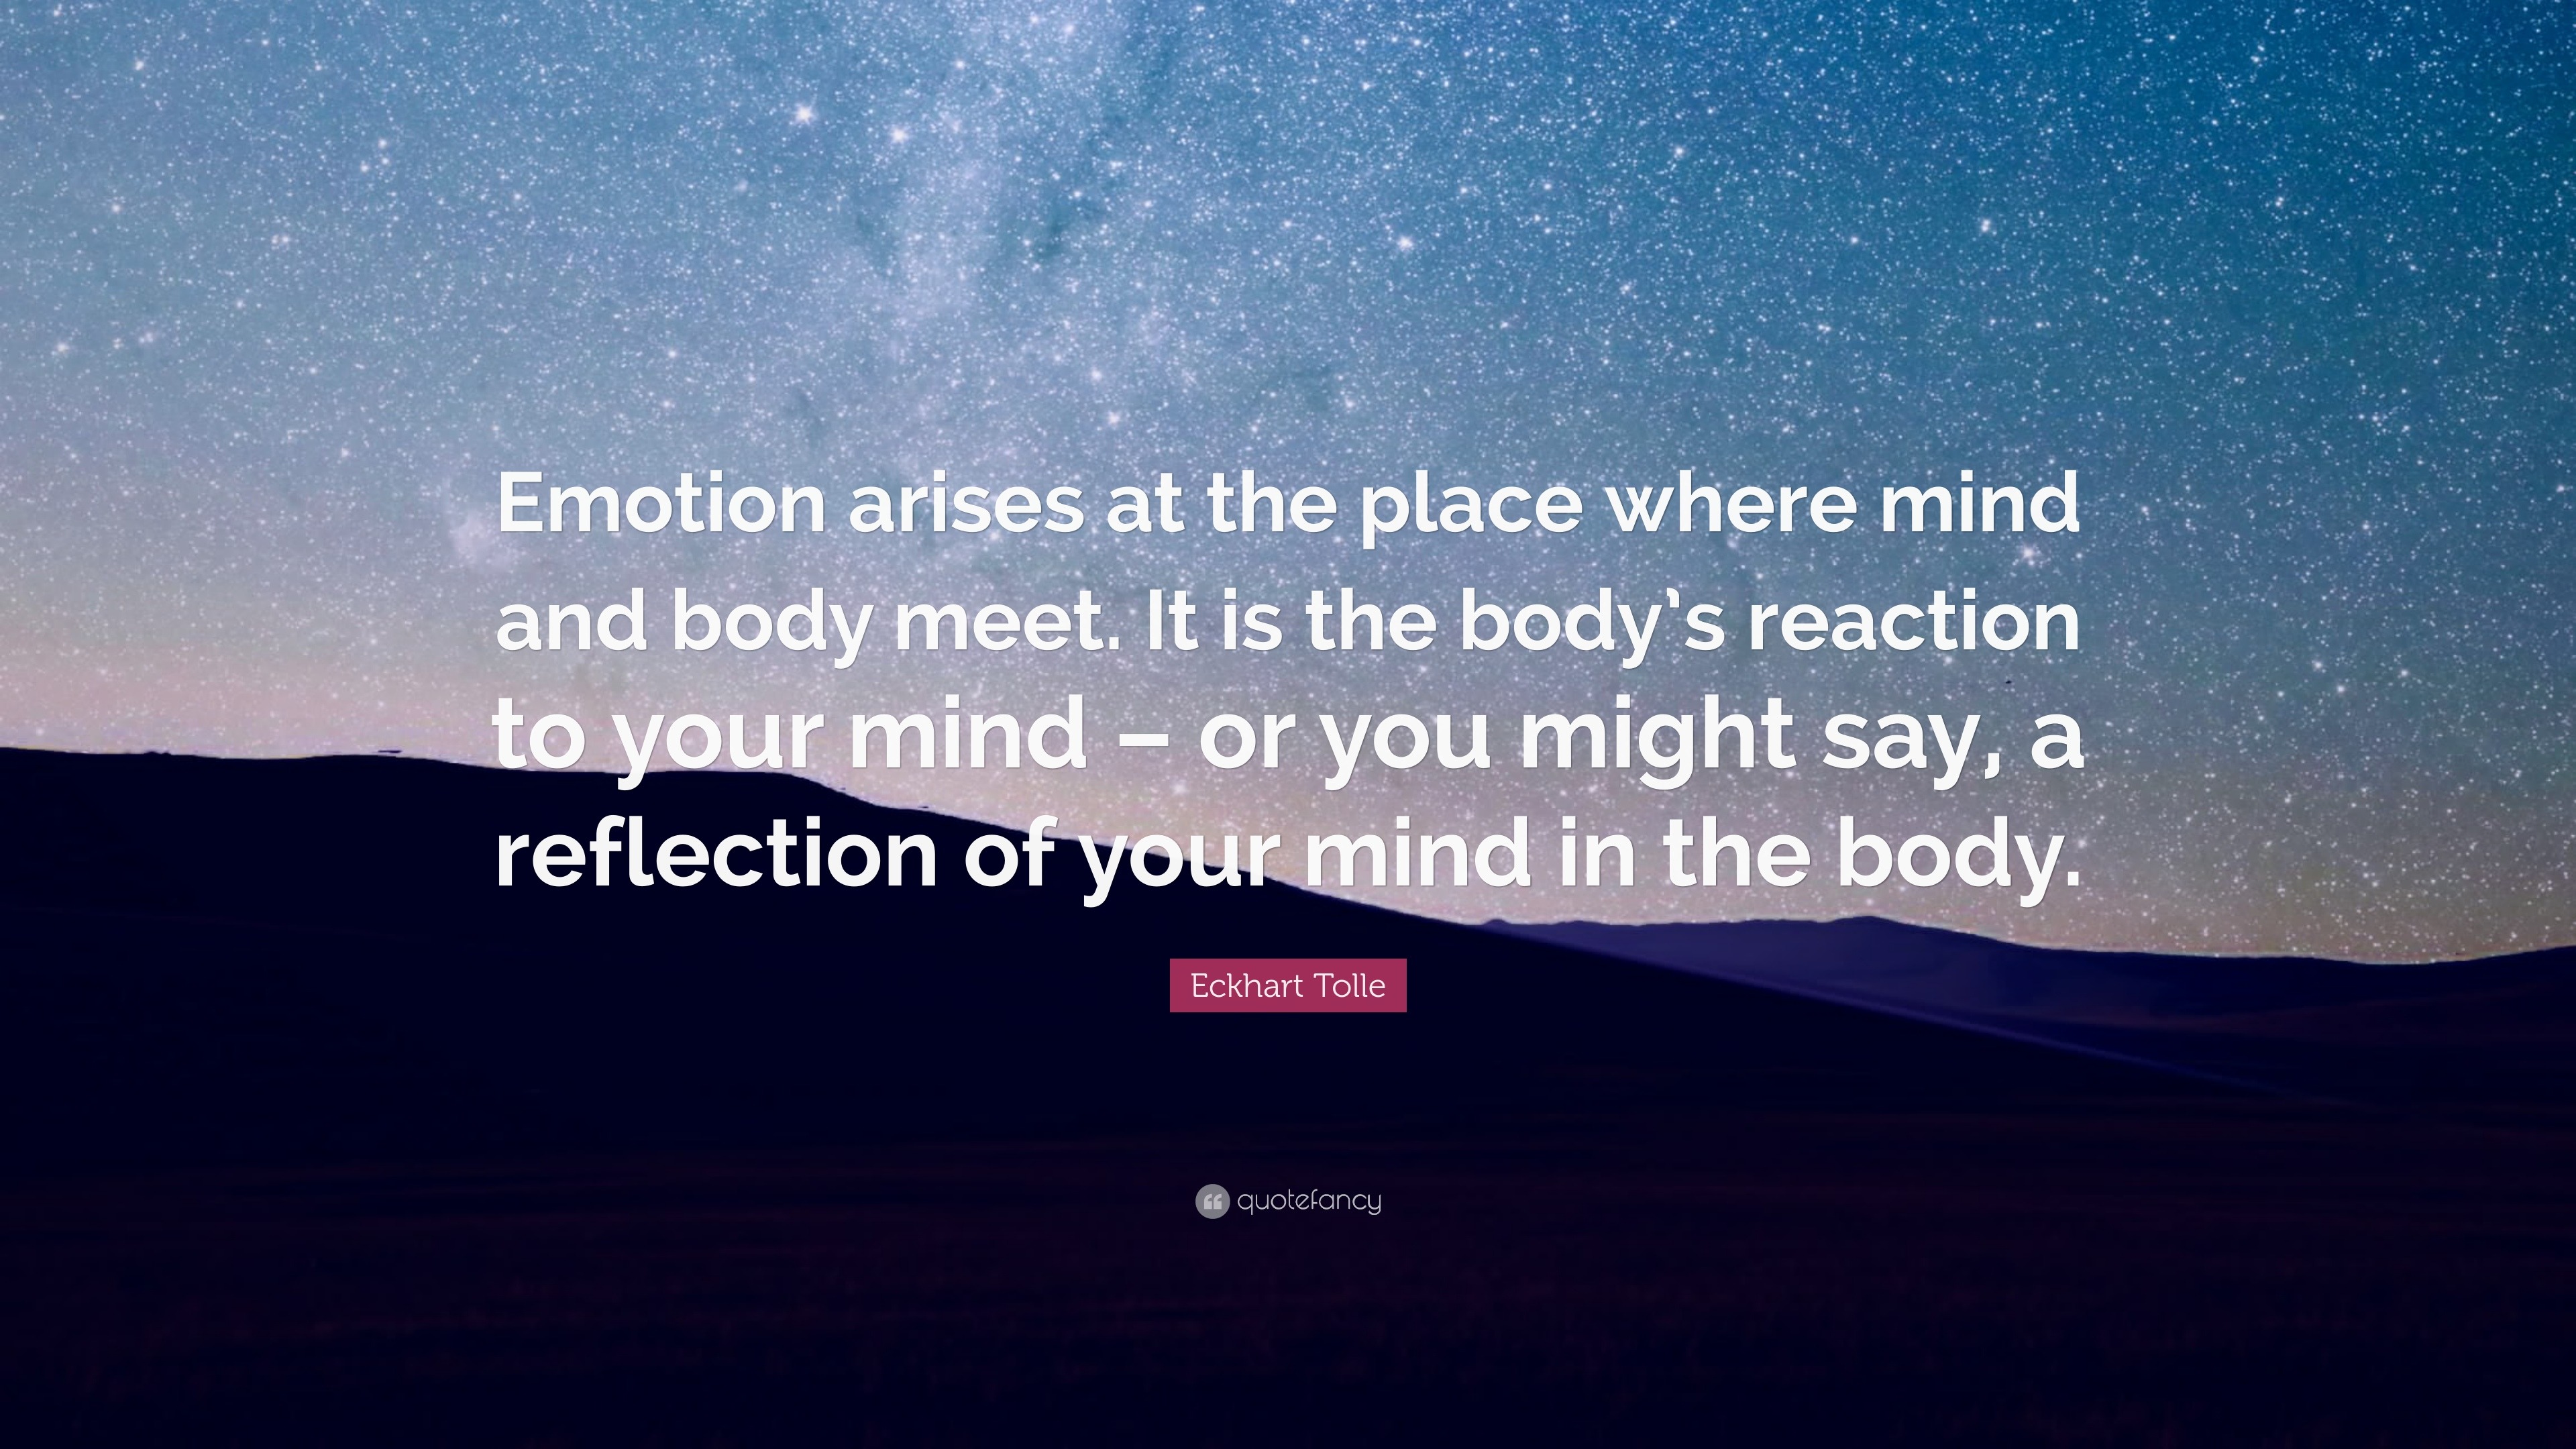 https://quotefancy.com/media/wallpaper/3840x2160/140045-Eckhart-Tolle-Quote-Emotion-arises-at-the-place-where-mind-and.jpg